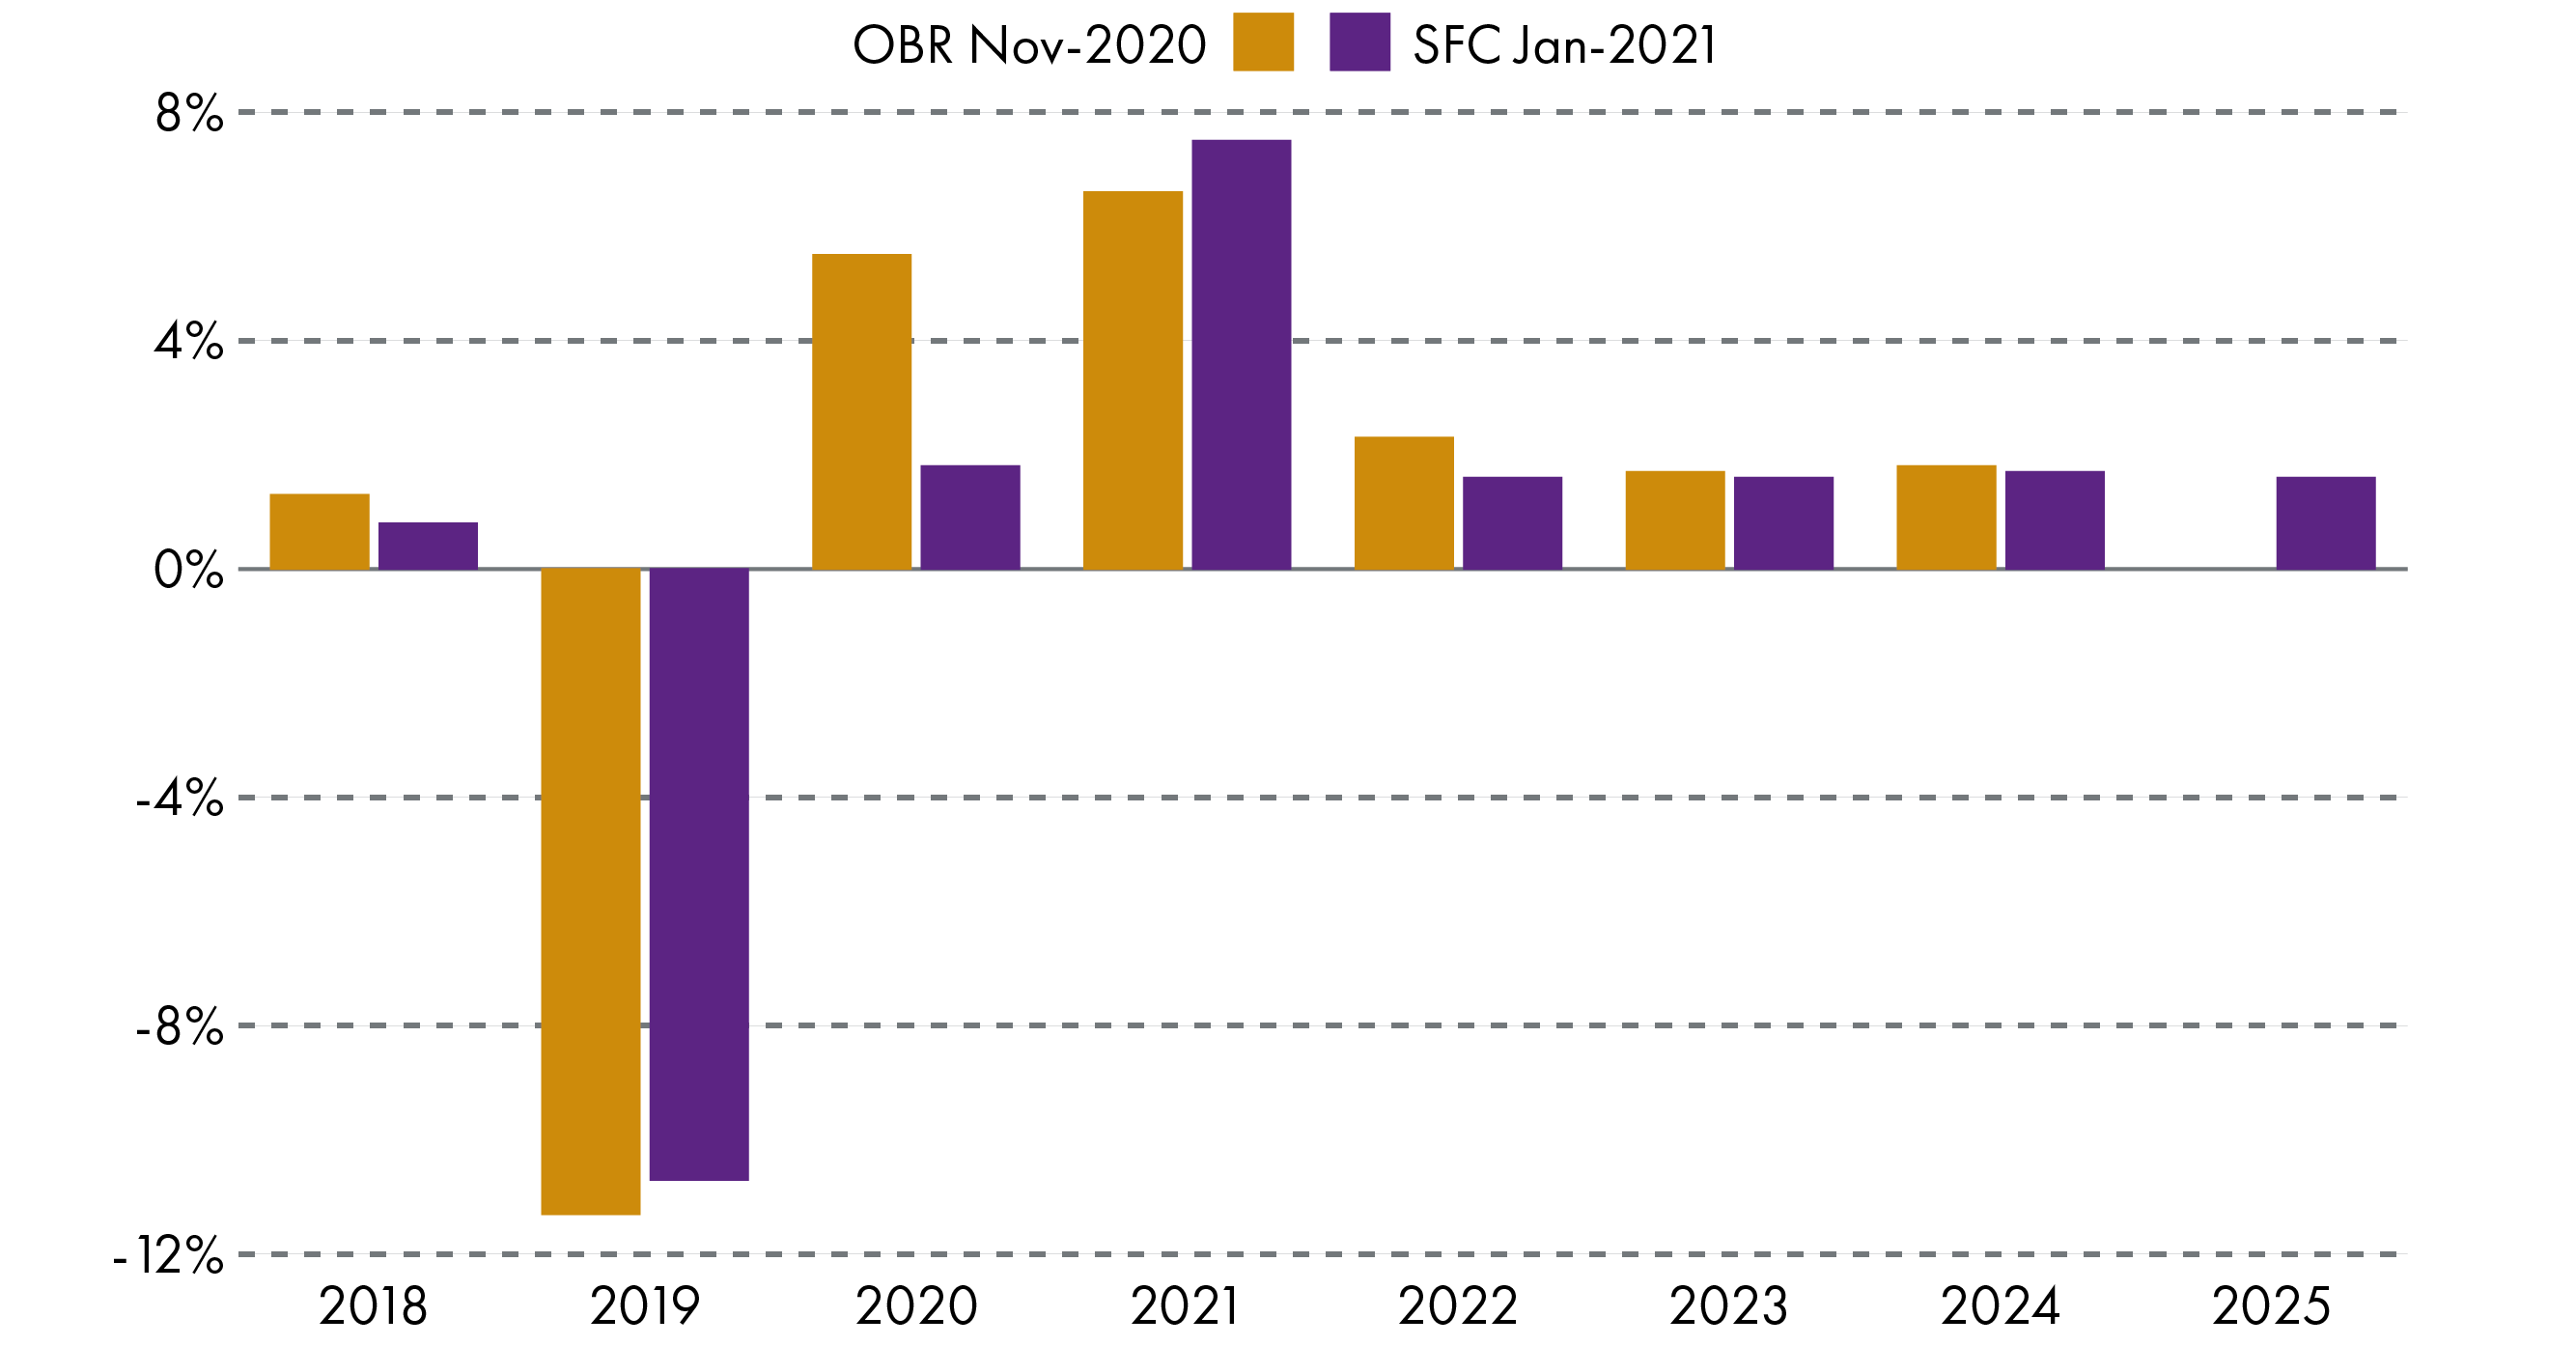 Figure two shows that in November 2020 the OBR predicted a much greater increase in UK GDP rowth rates compared with the January 2021 forecasts by the SFC. The SFC however forecast, in January 2021, greater GDP growth rates for 2021 than the OBR forecast in November 2020.